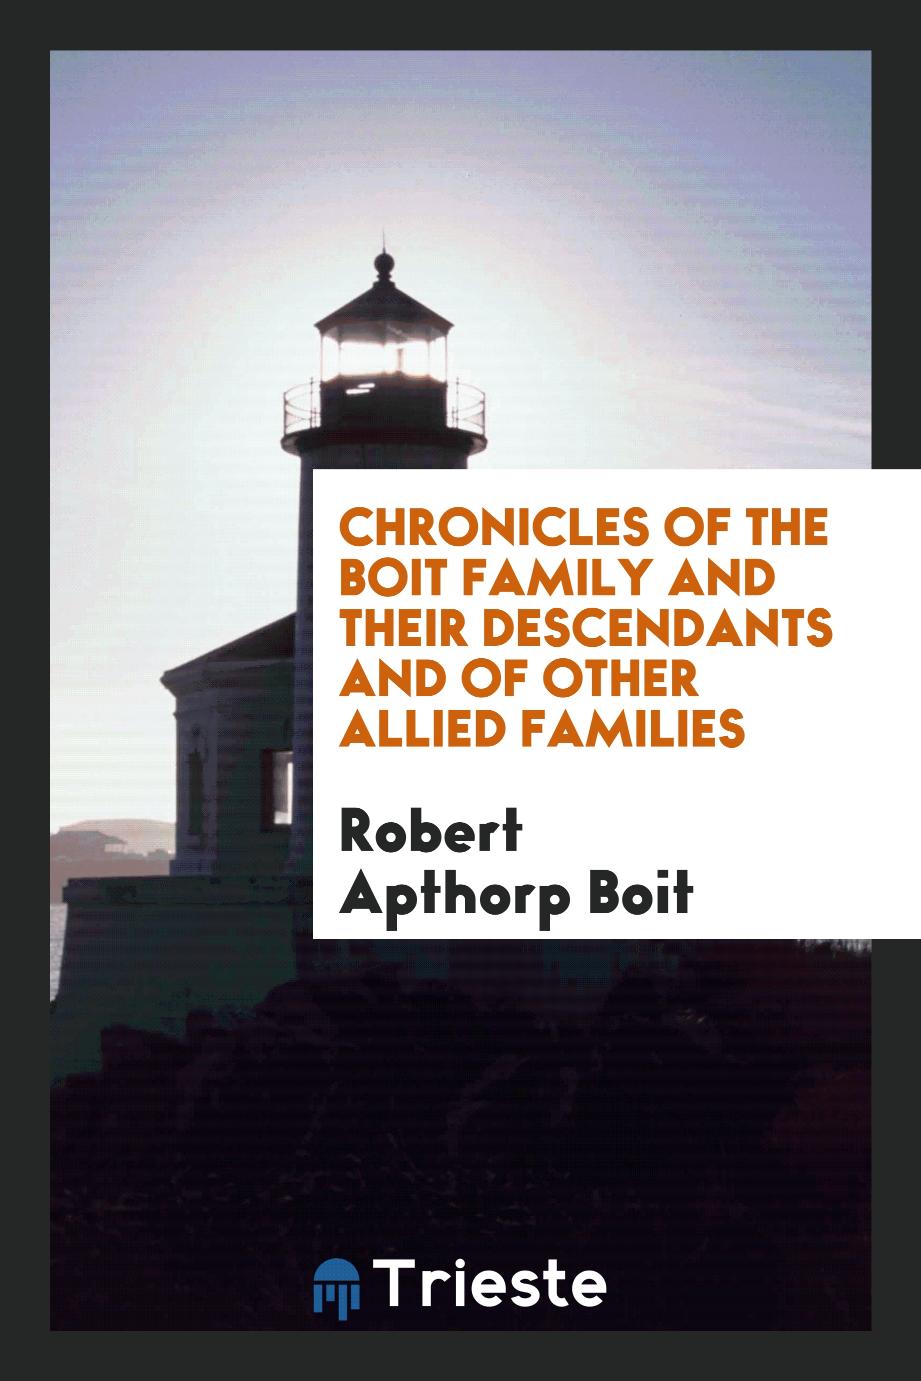 Chronicles of the Boit family and their descendants and of other allied families